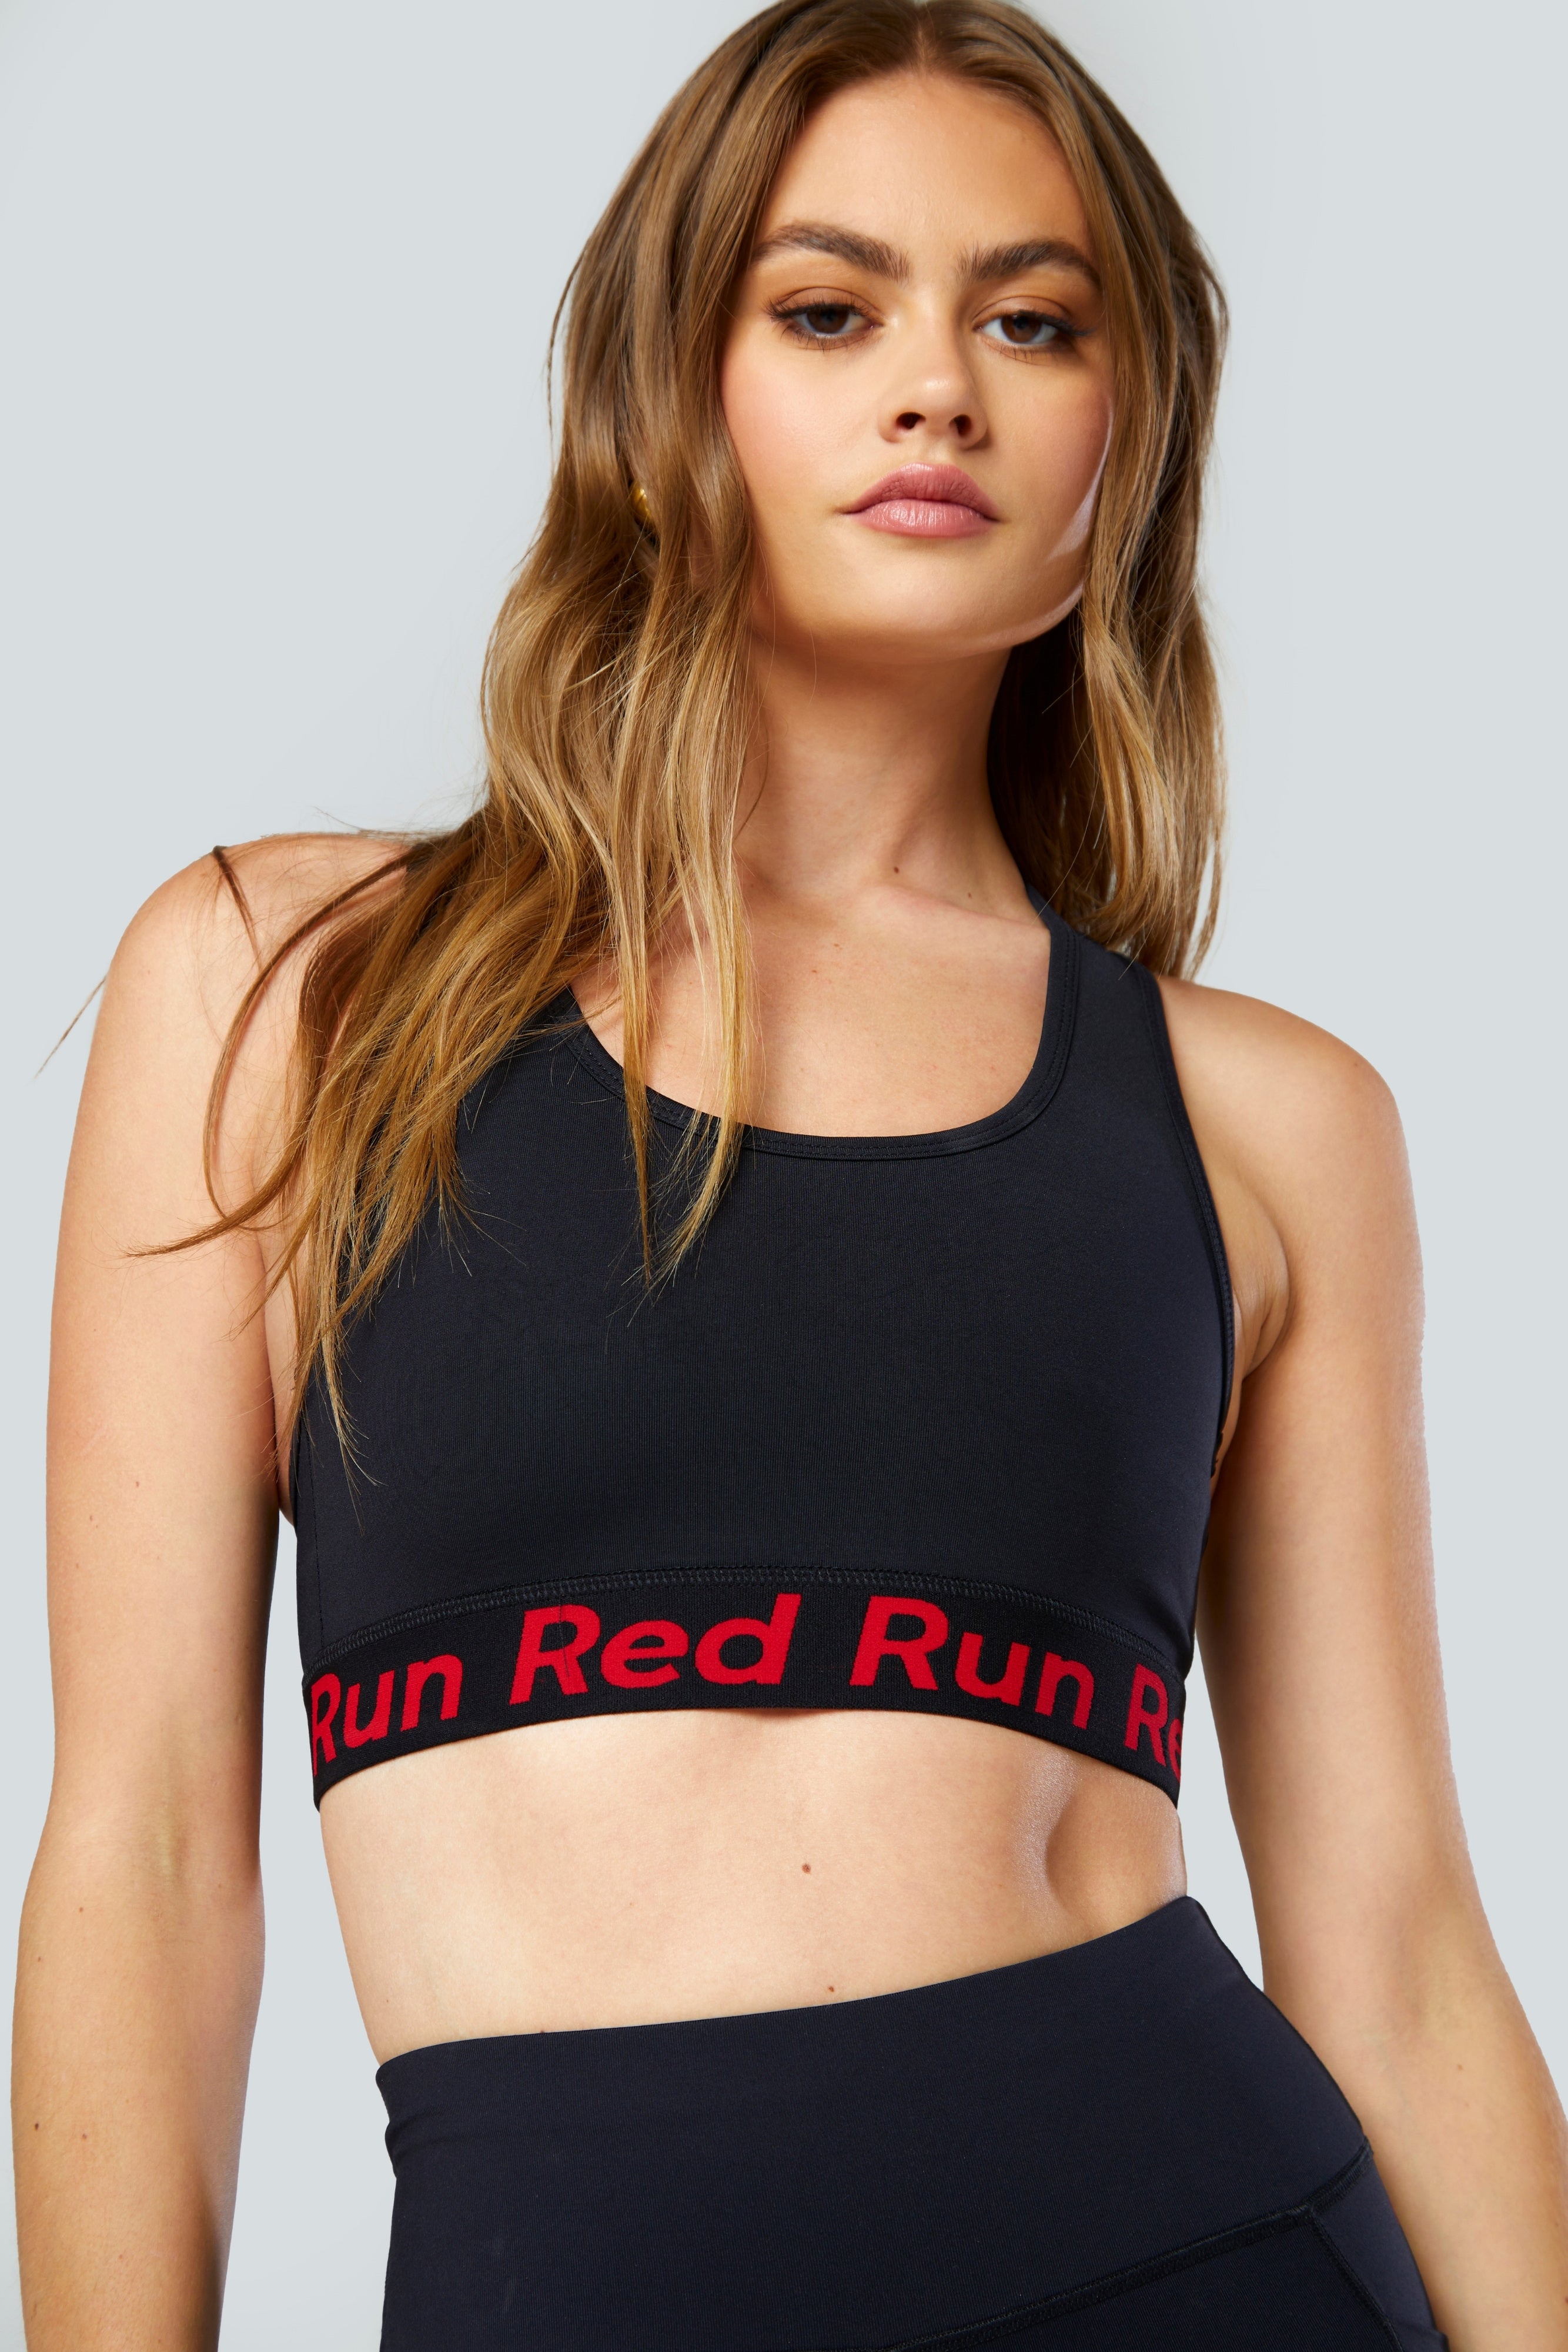 Sports Bra Top - Inky collection